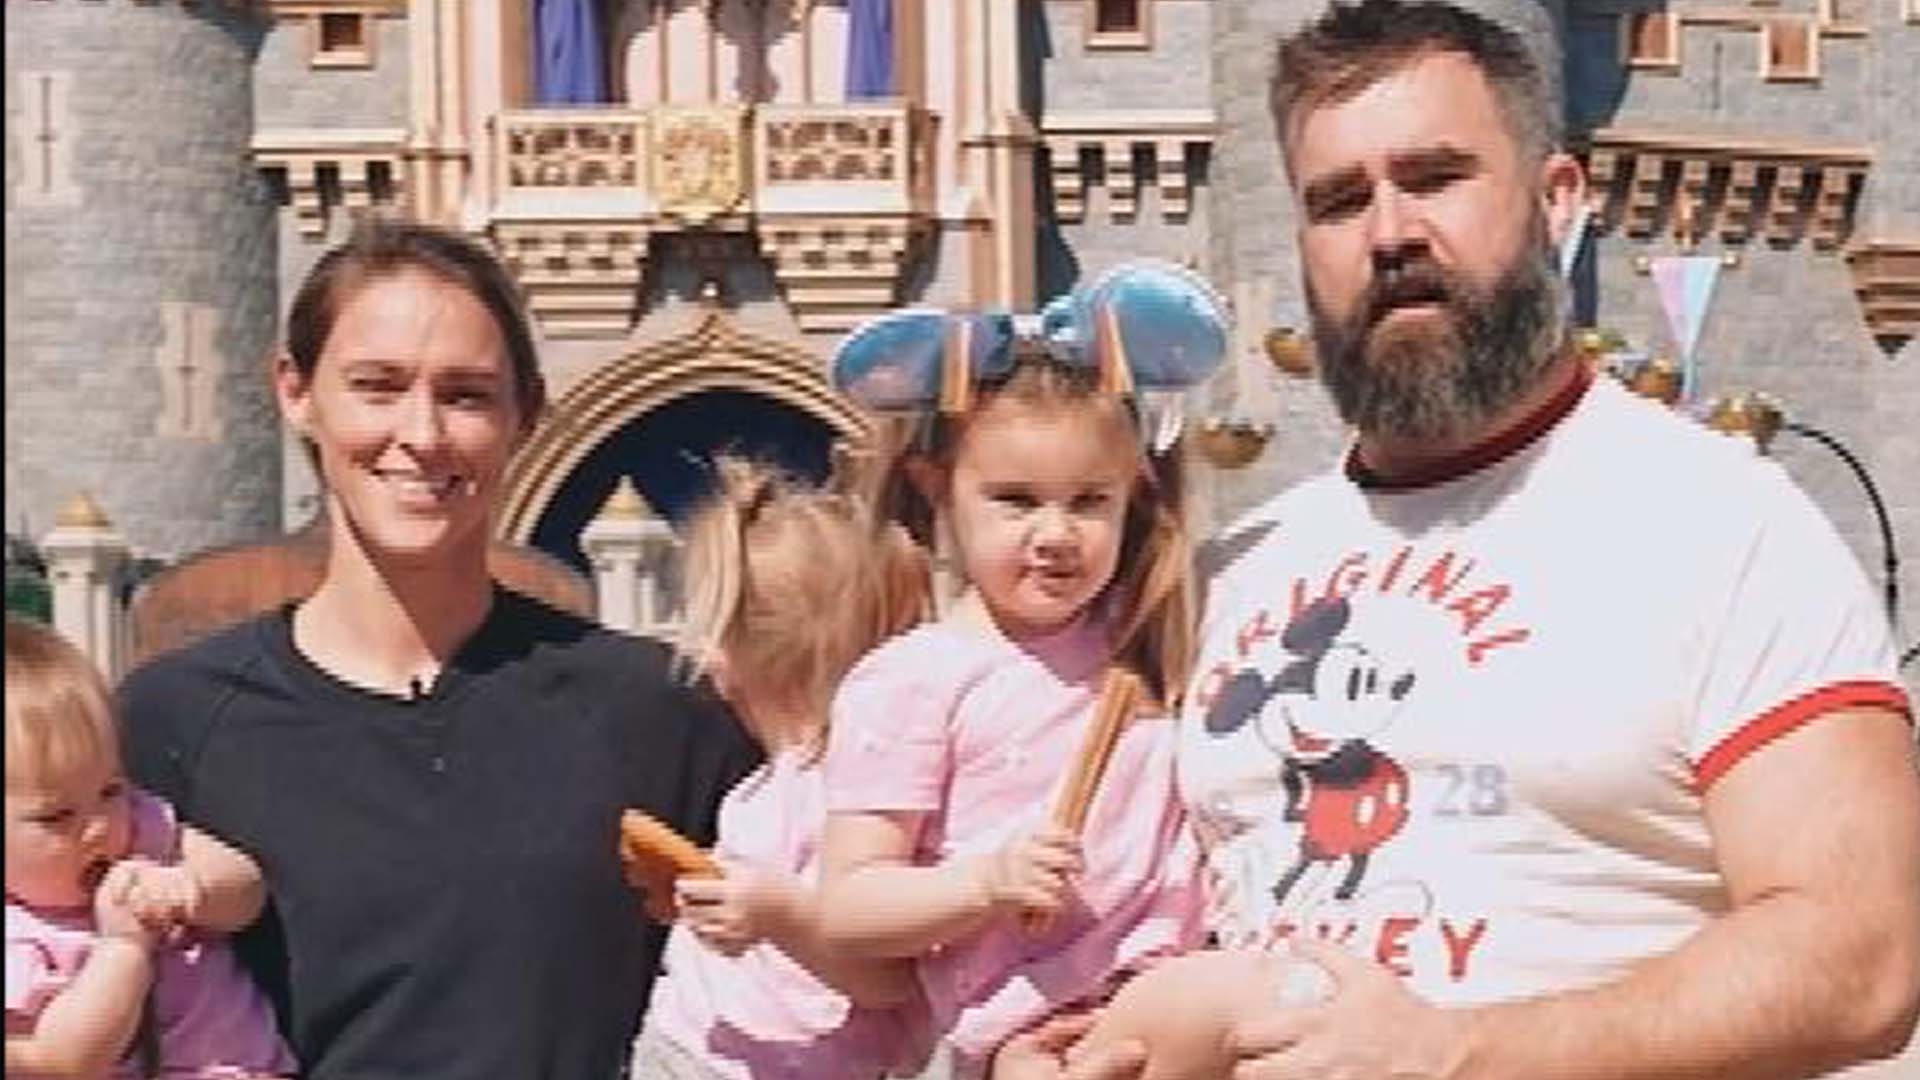 Jason Kelce's Wife Kylie Shares Family Excitement as the entire Jason family down to their three beautiful daughter will be at Allegiant stadium to cheer on uncle Travis: "Wyatt is Super Excited she will be Meeting Taylor"